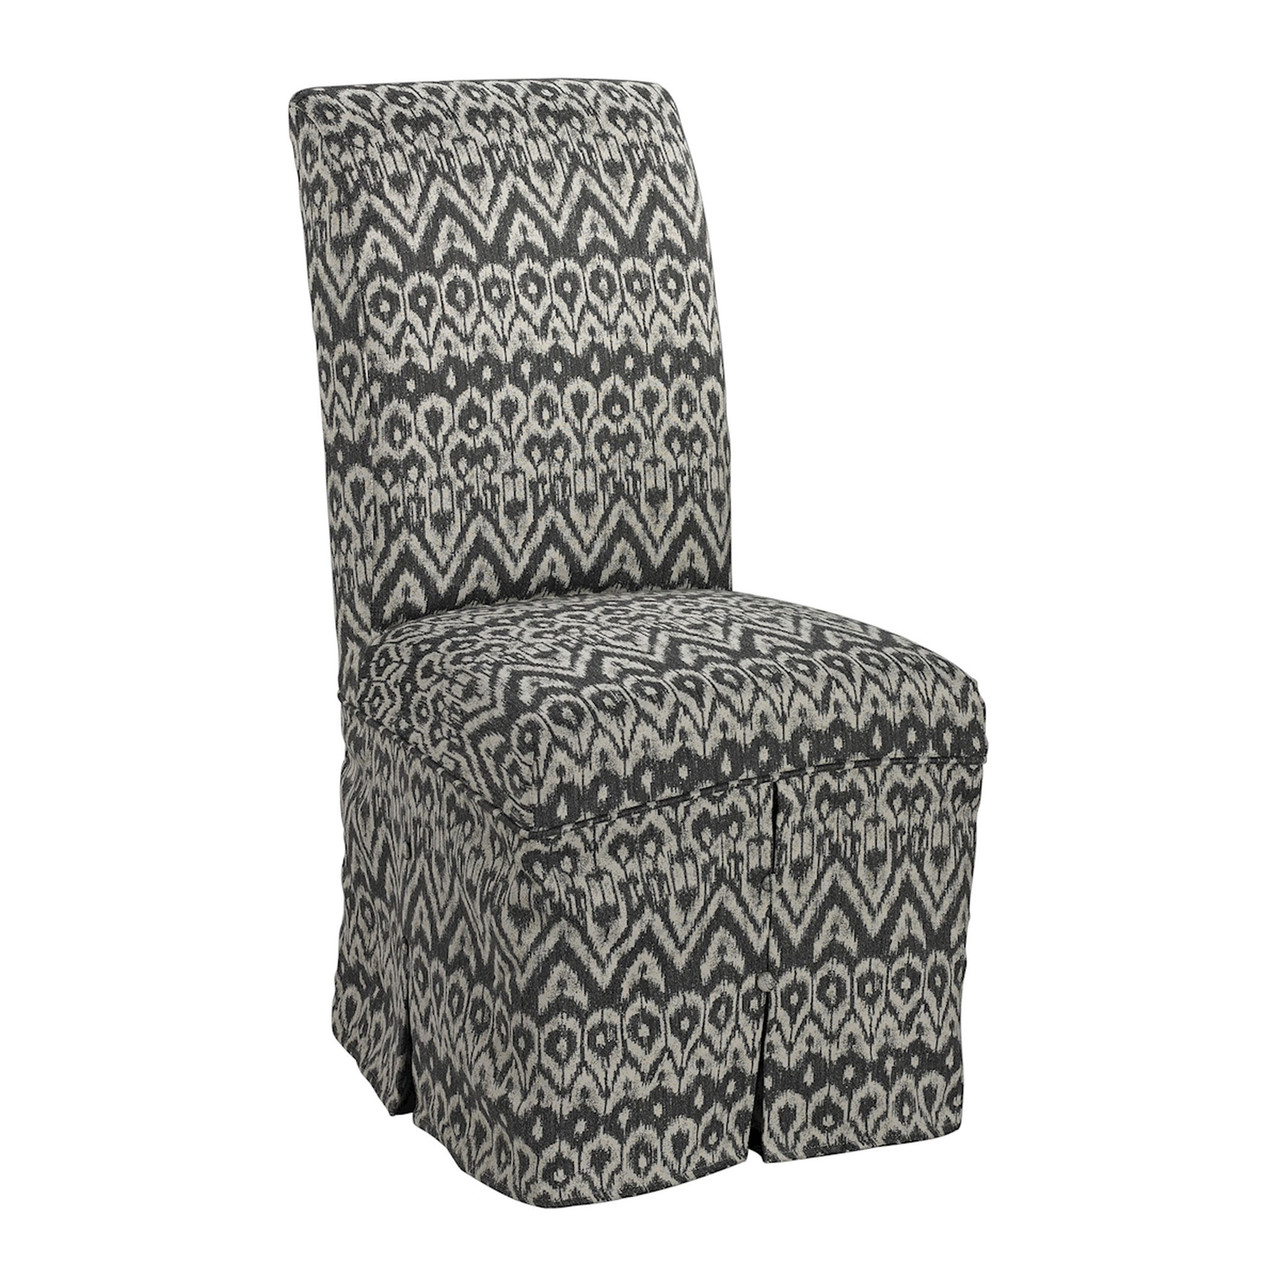 ELK HOME 6086431 Ambrosia Driftwood Parsons Skirted Chair - COVER ONLY